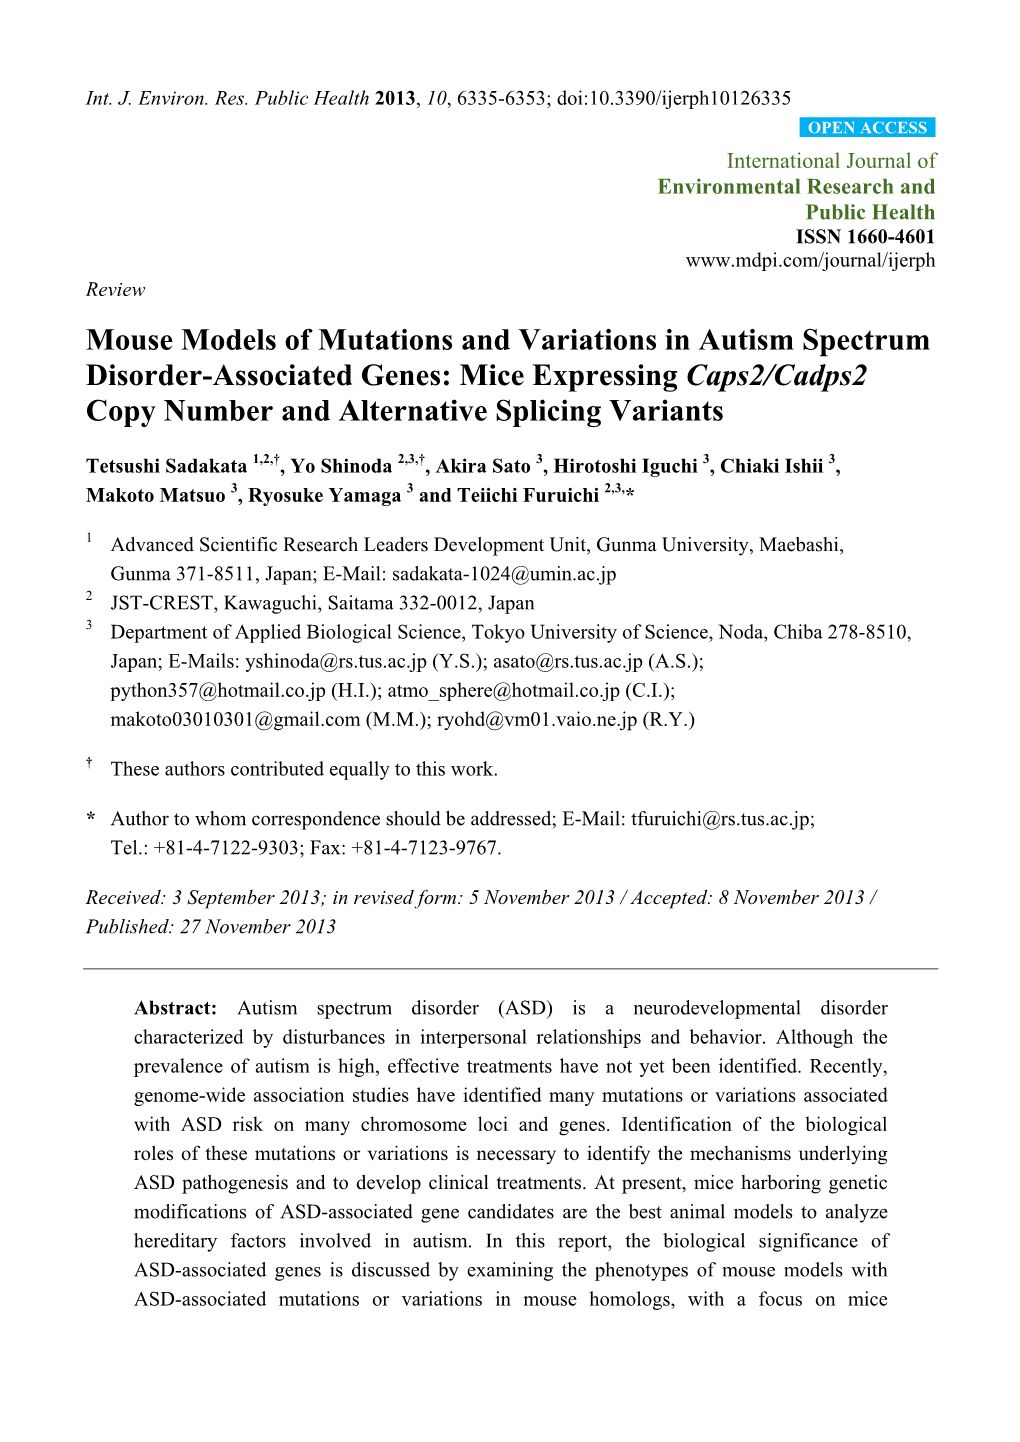 Mouse Models of Mutations and Variations in Autism Spectrum Disorder-Associated Genes: Mice Expressing Caps2/Cadps2 Copy Number and Alternative Splicing Variants